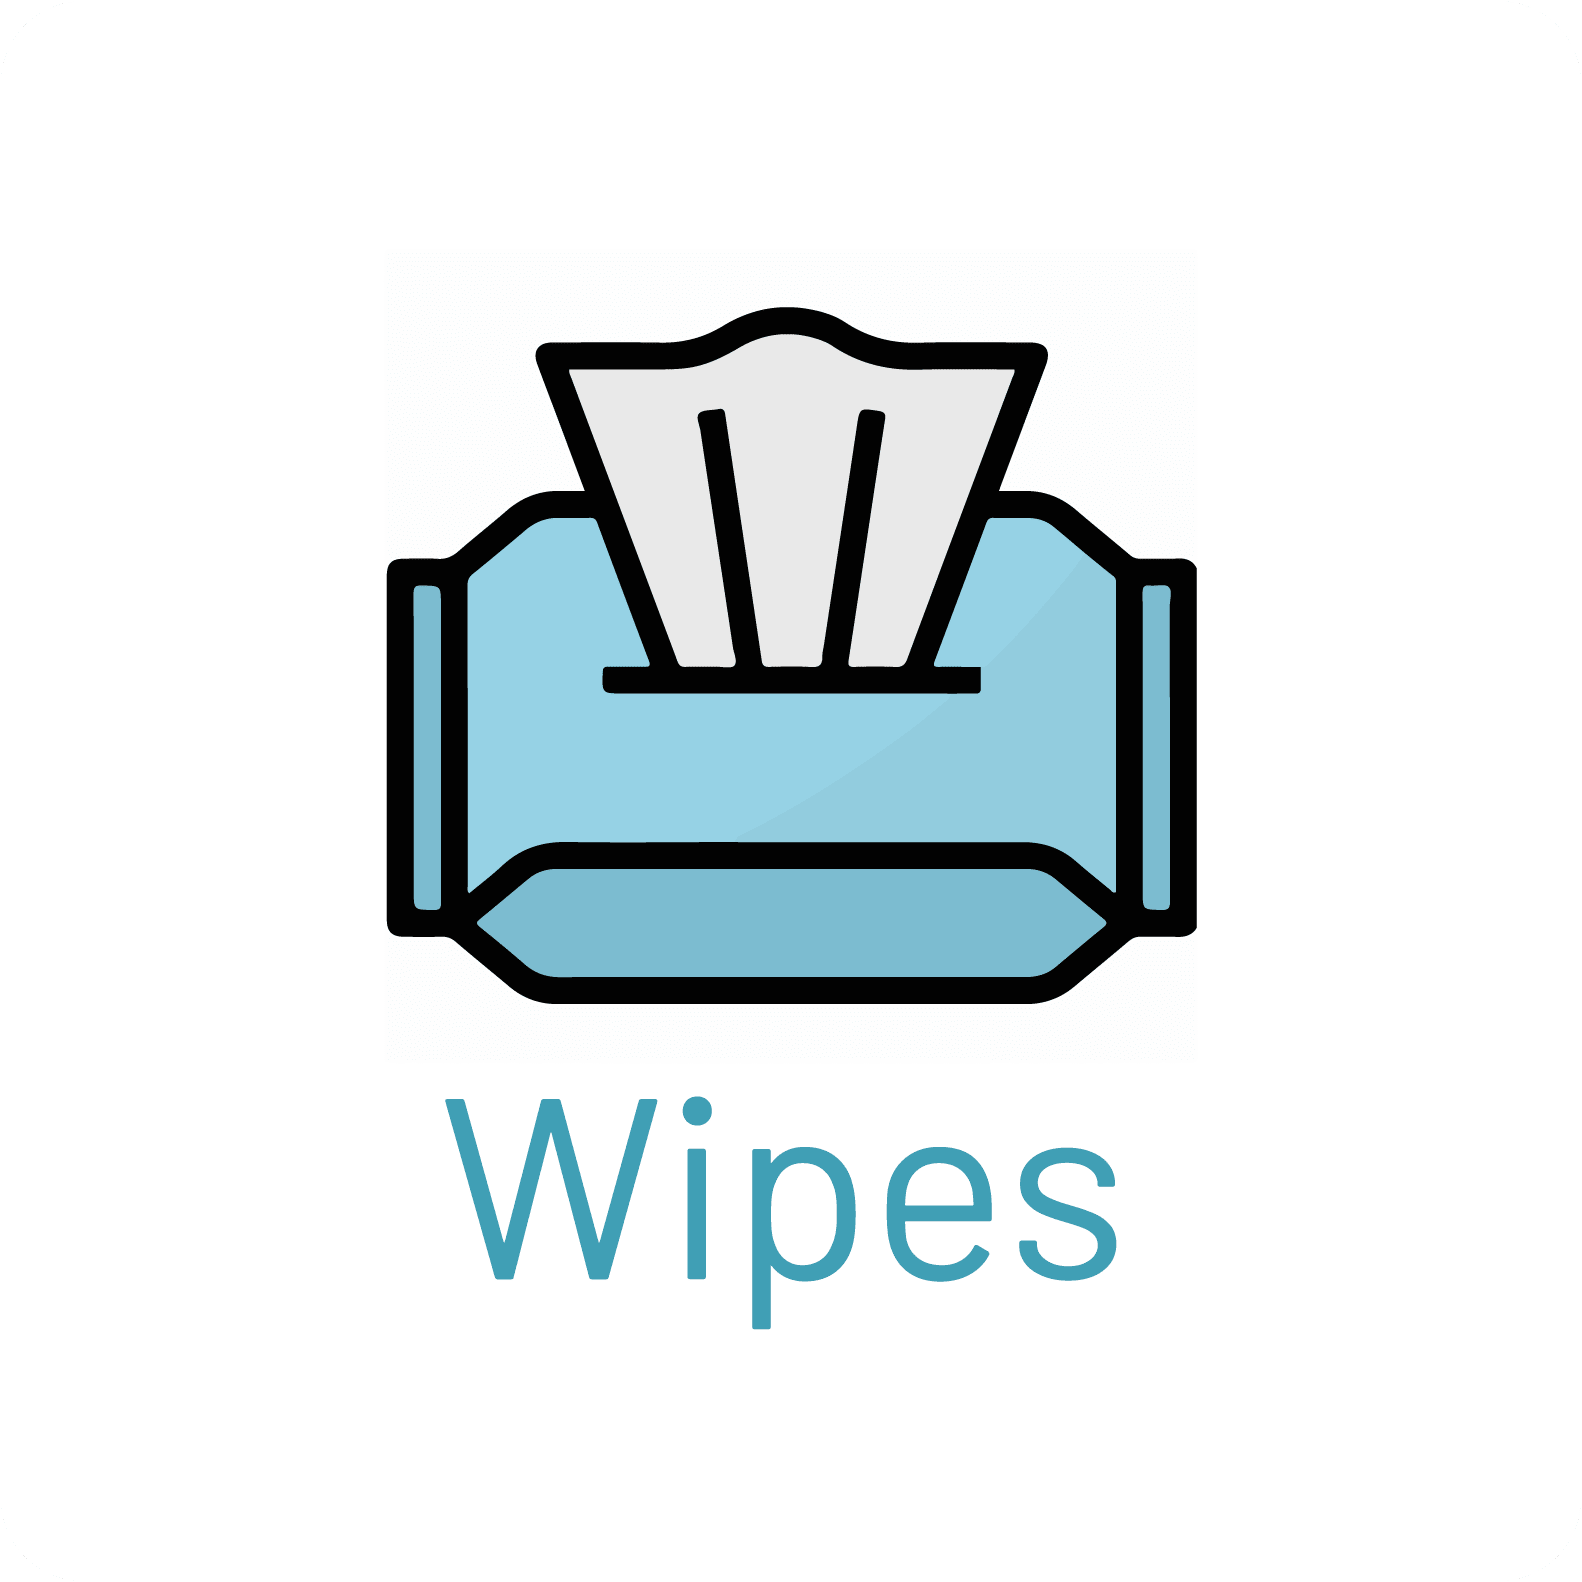 Image for wipes category